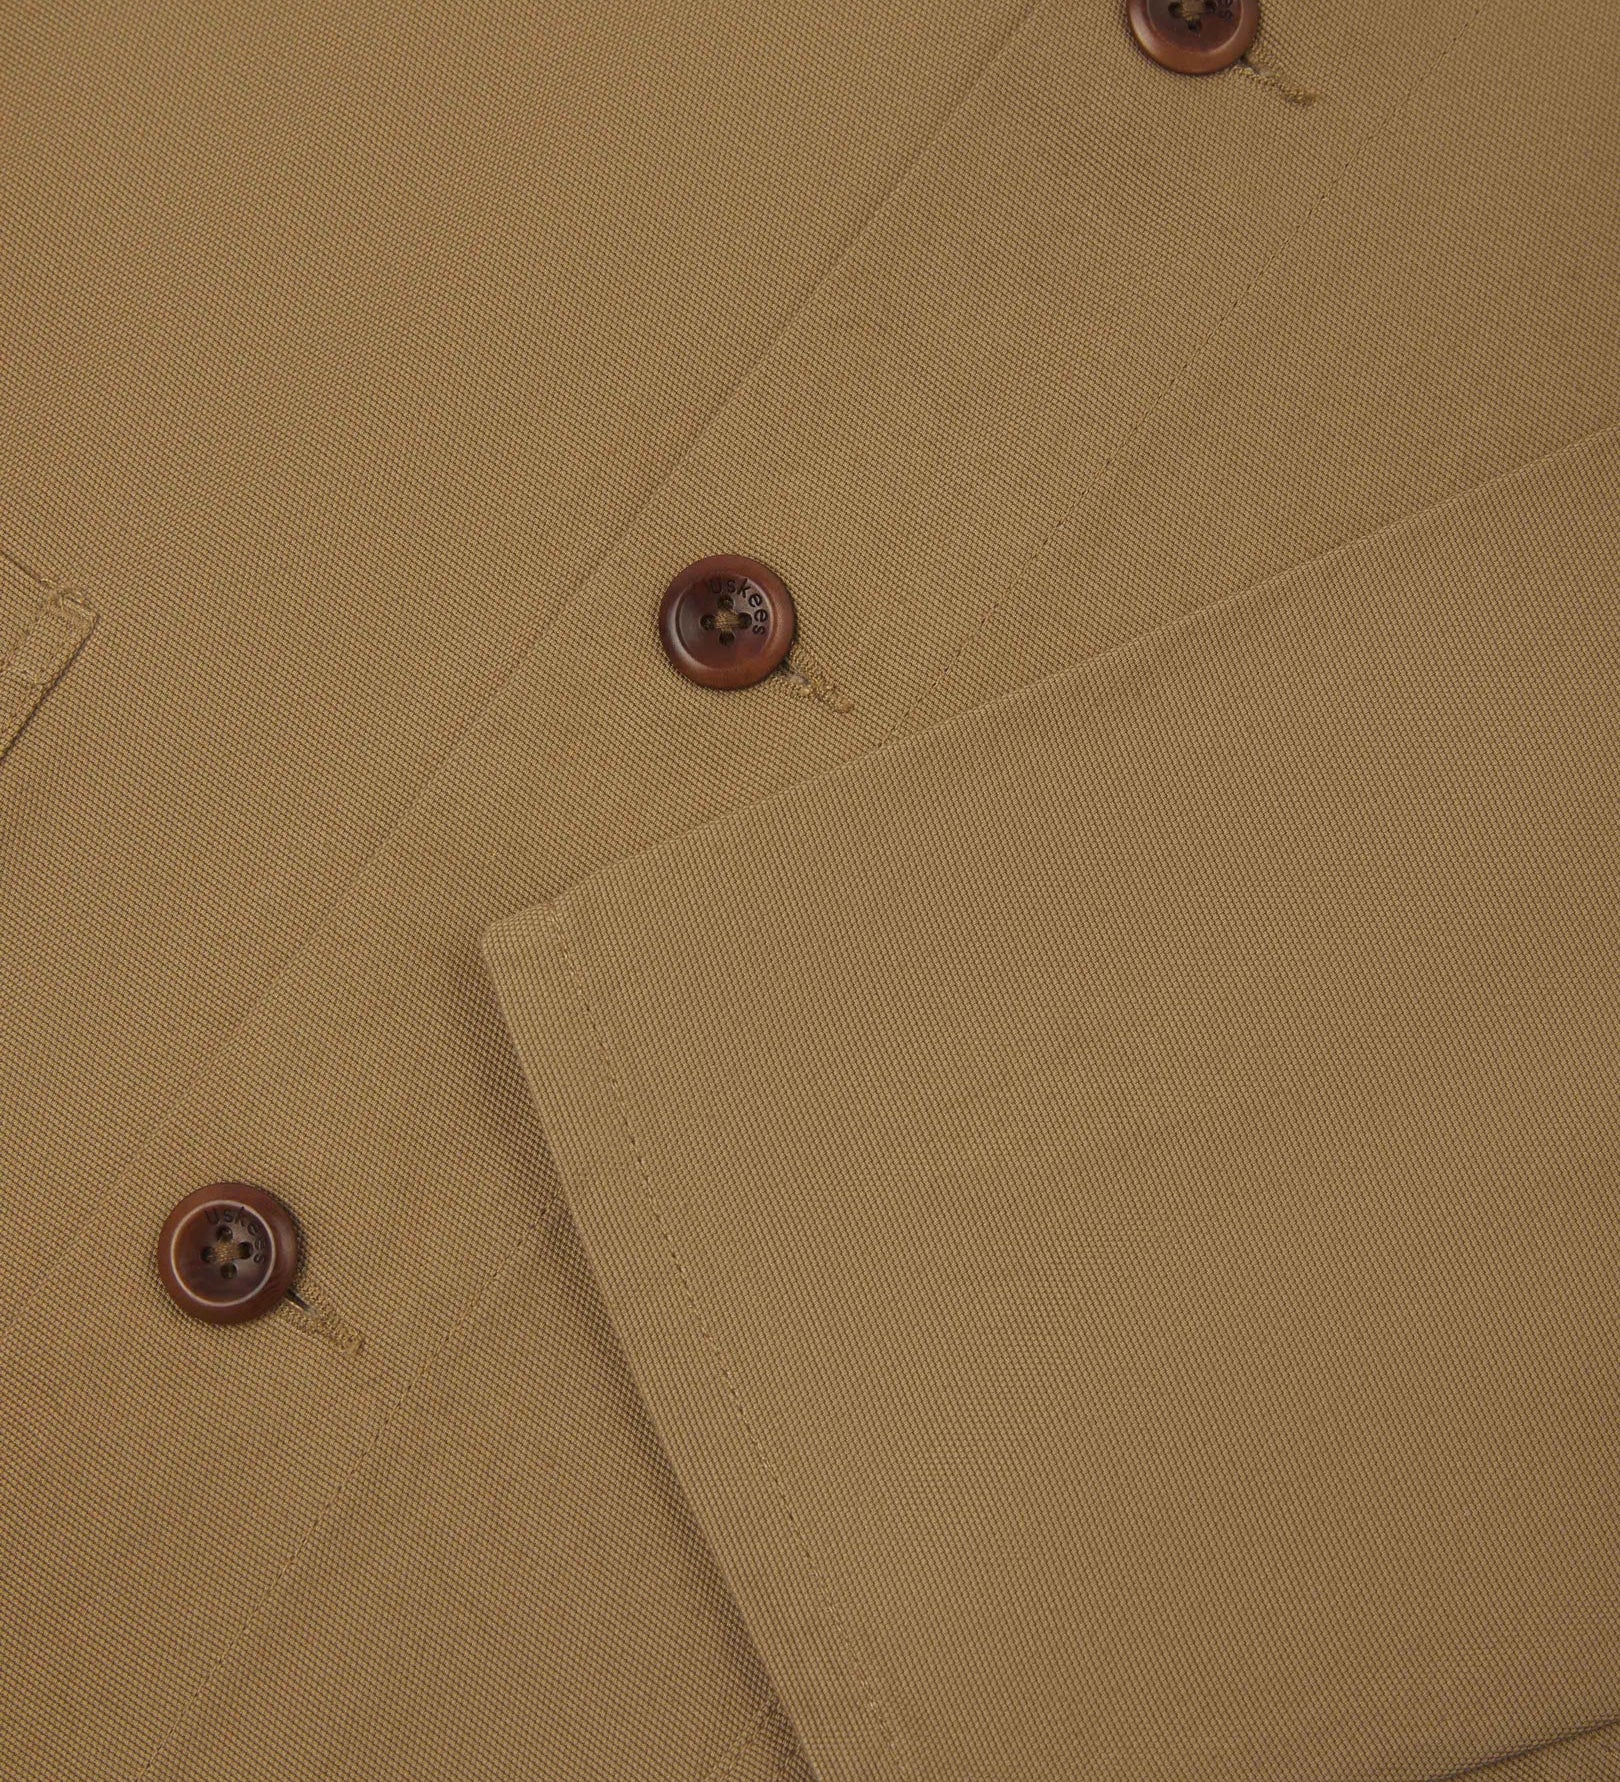 Closer view of mid section of khaki, buttoned organic cotton overshirt from Uskees. Focus on cuff, pockets and corozo buttons.